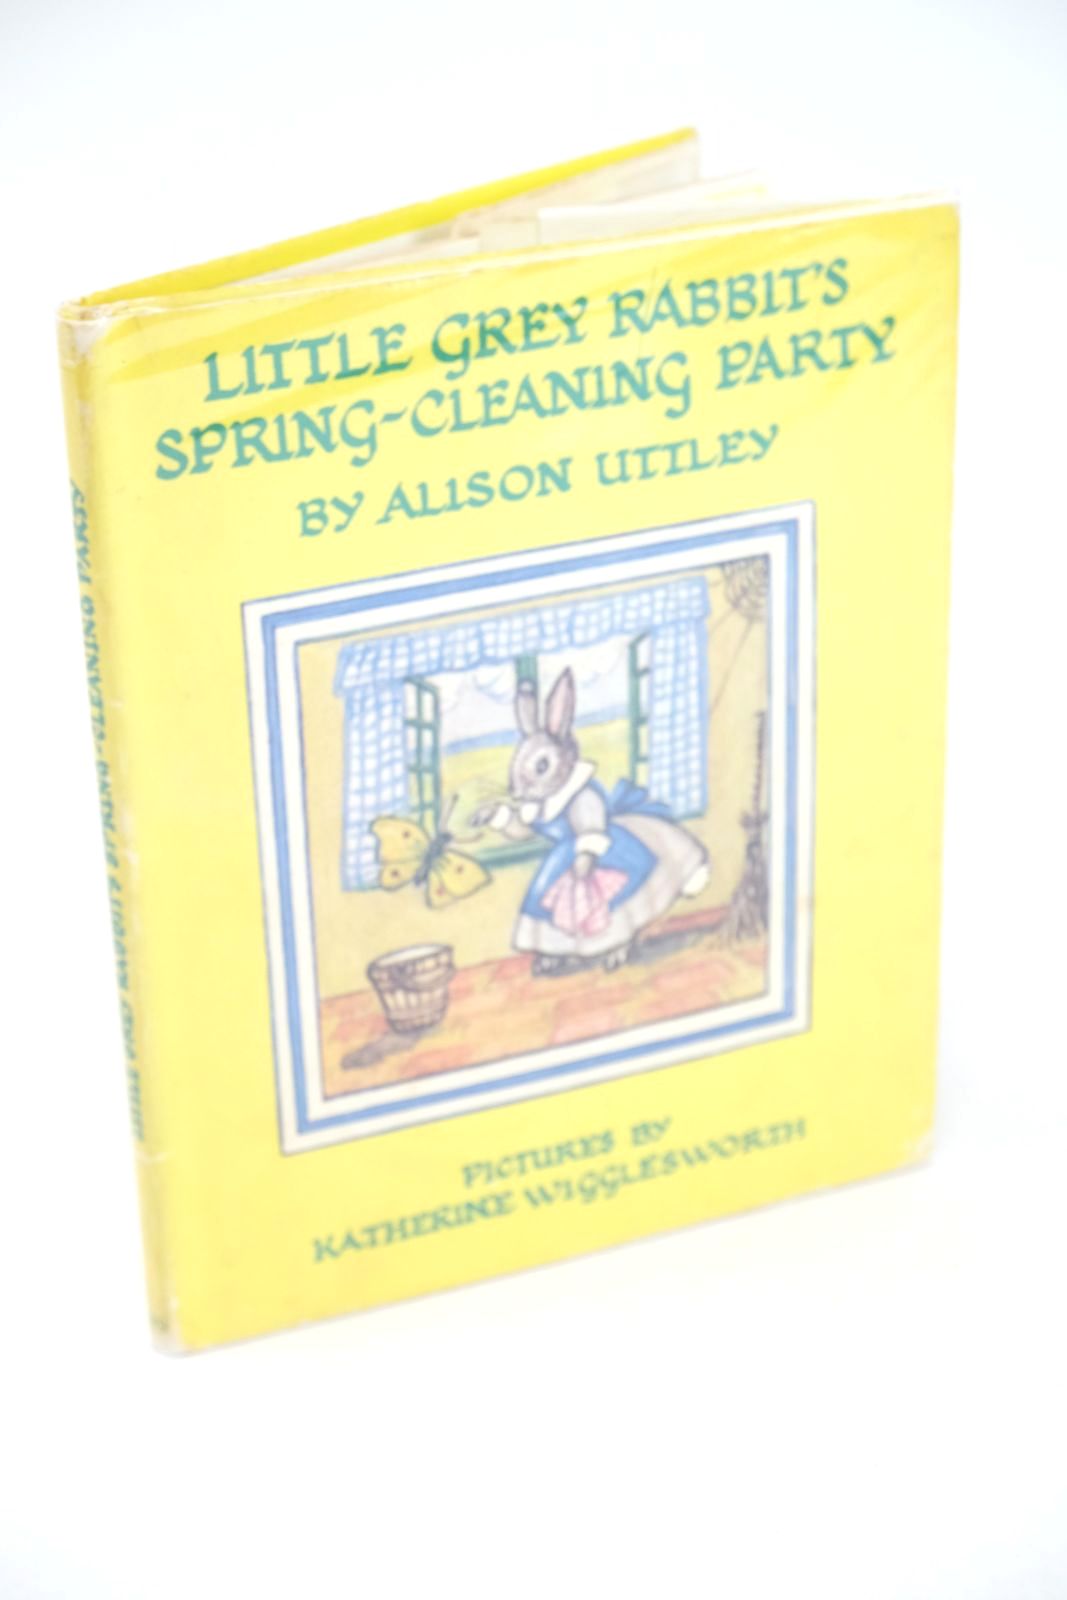 Photo of LITTLE GREY RABBIT'S SPRING-CLEANING PARTY written by Uttley, Alison illustrated by Wigglesworth, Katherine published by Collins (STOCK CODE: 1325725)  for sale by Stella & Rose's Books